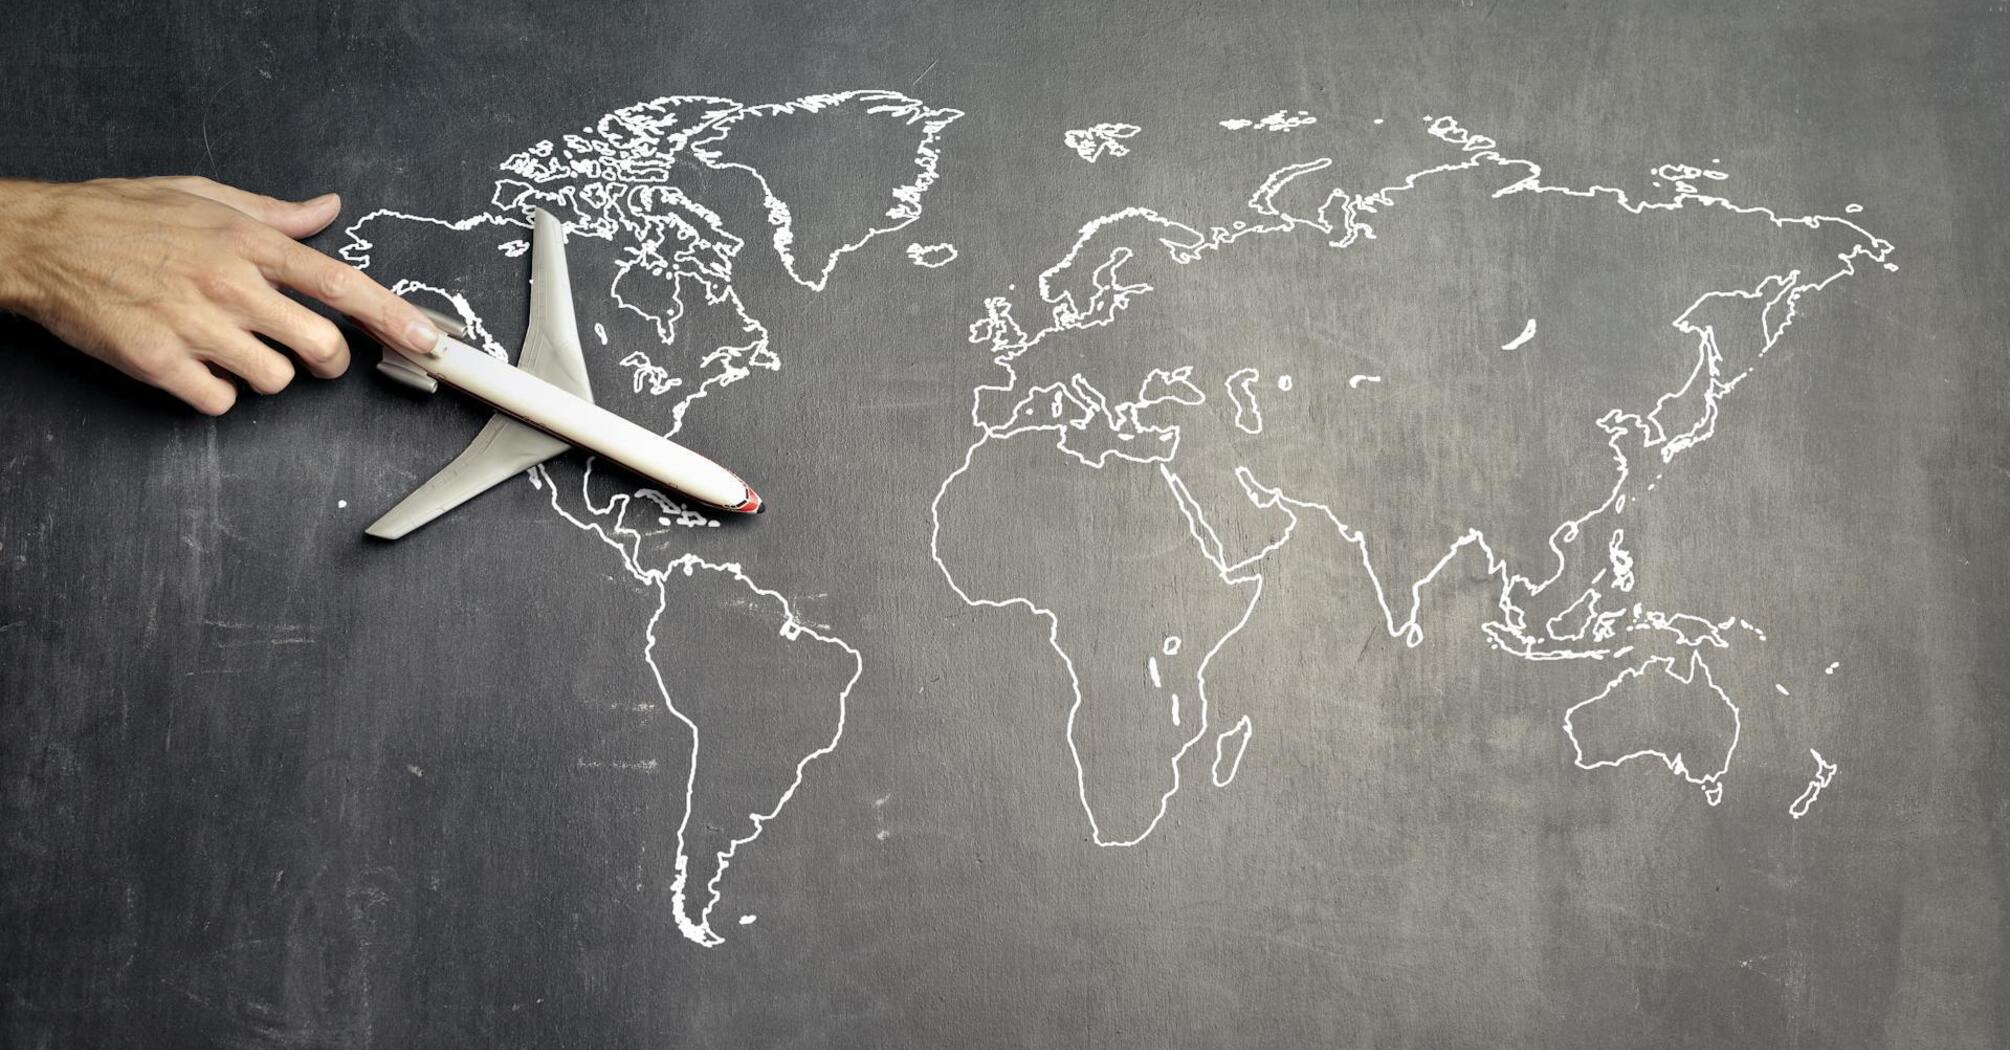 A hand guiding a toy airplane over a world map drawn on a chalkboard